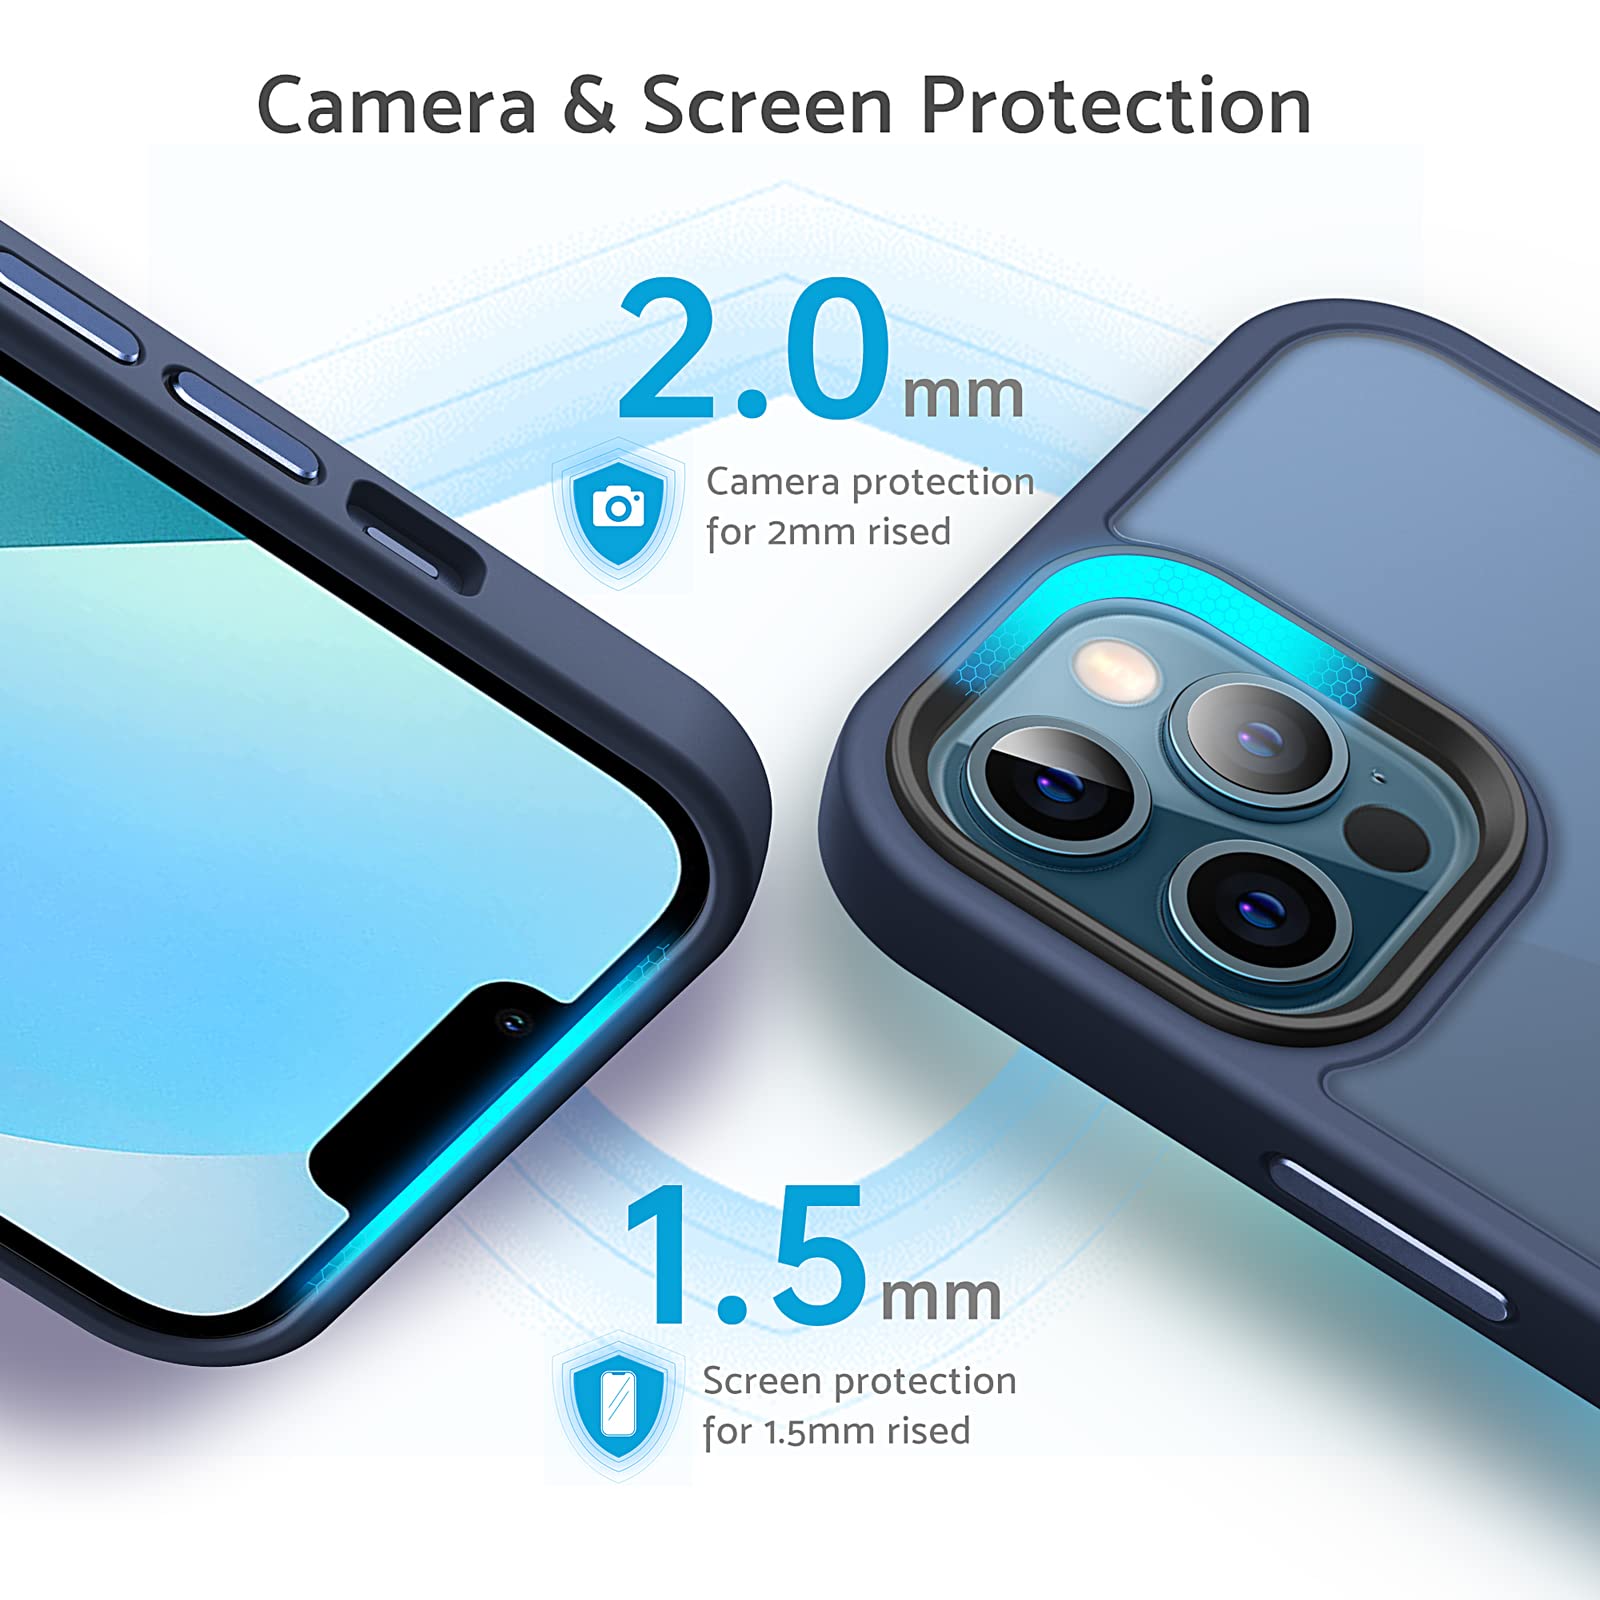 Anqrp Designed for iPhone 12/ iPhone 12 Pro Magnetic Case, [Support Magsafe] Super Soft Silicone Slim Phone Case Cover Compatible with iPhone 12/ iPhone 12 Pro 6.1", Blue